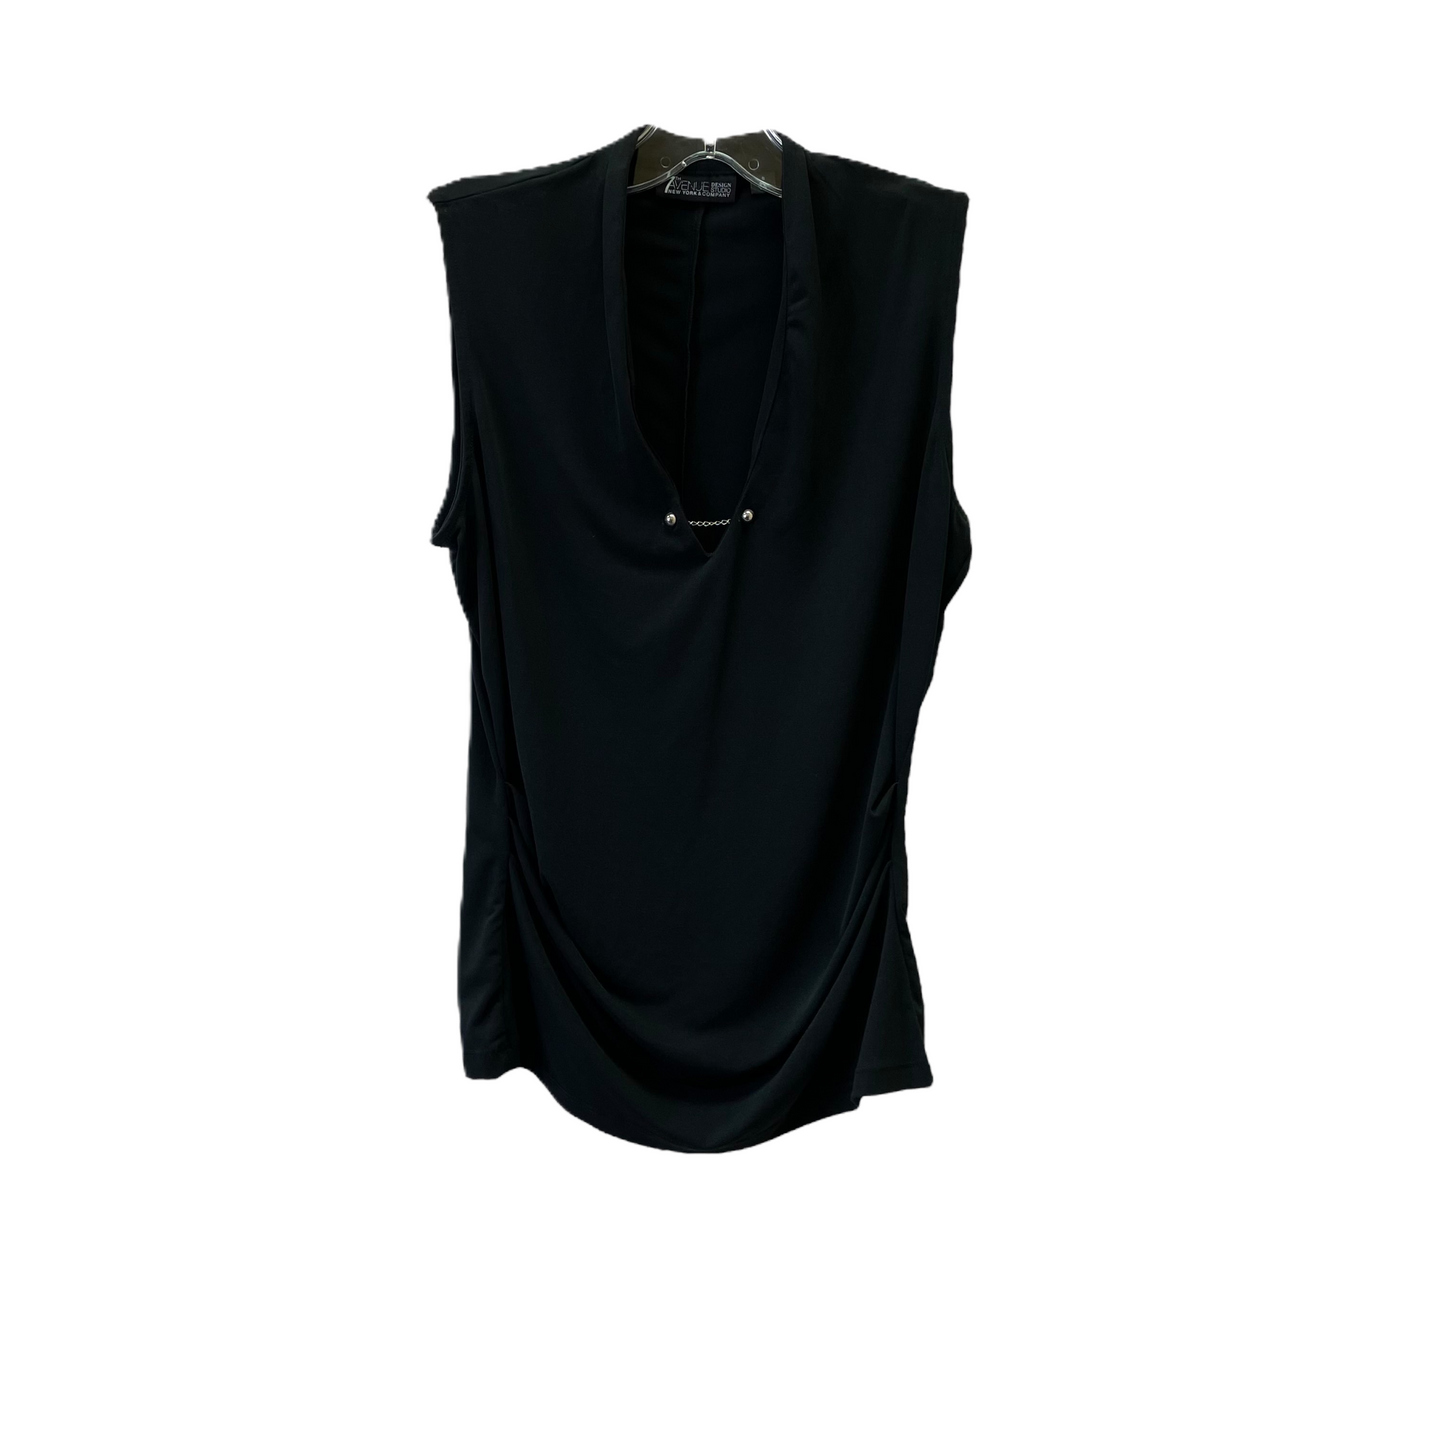 Black Top Short Sleeve By New York And Co, Size: S